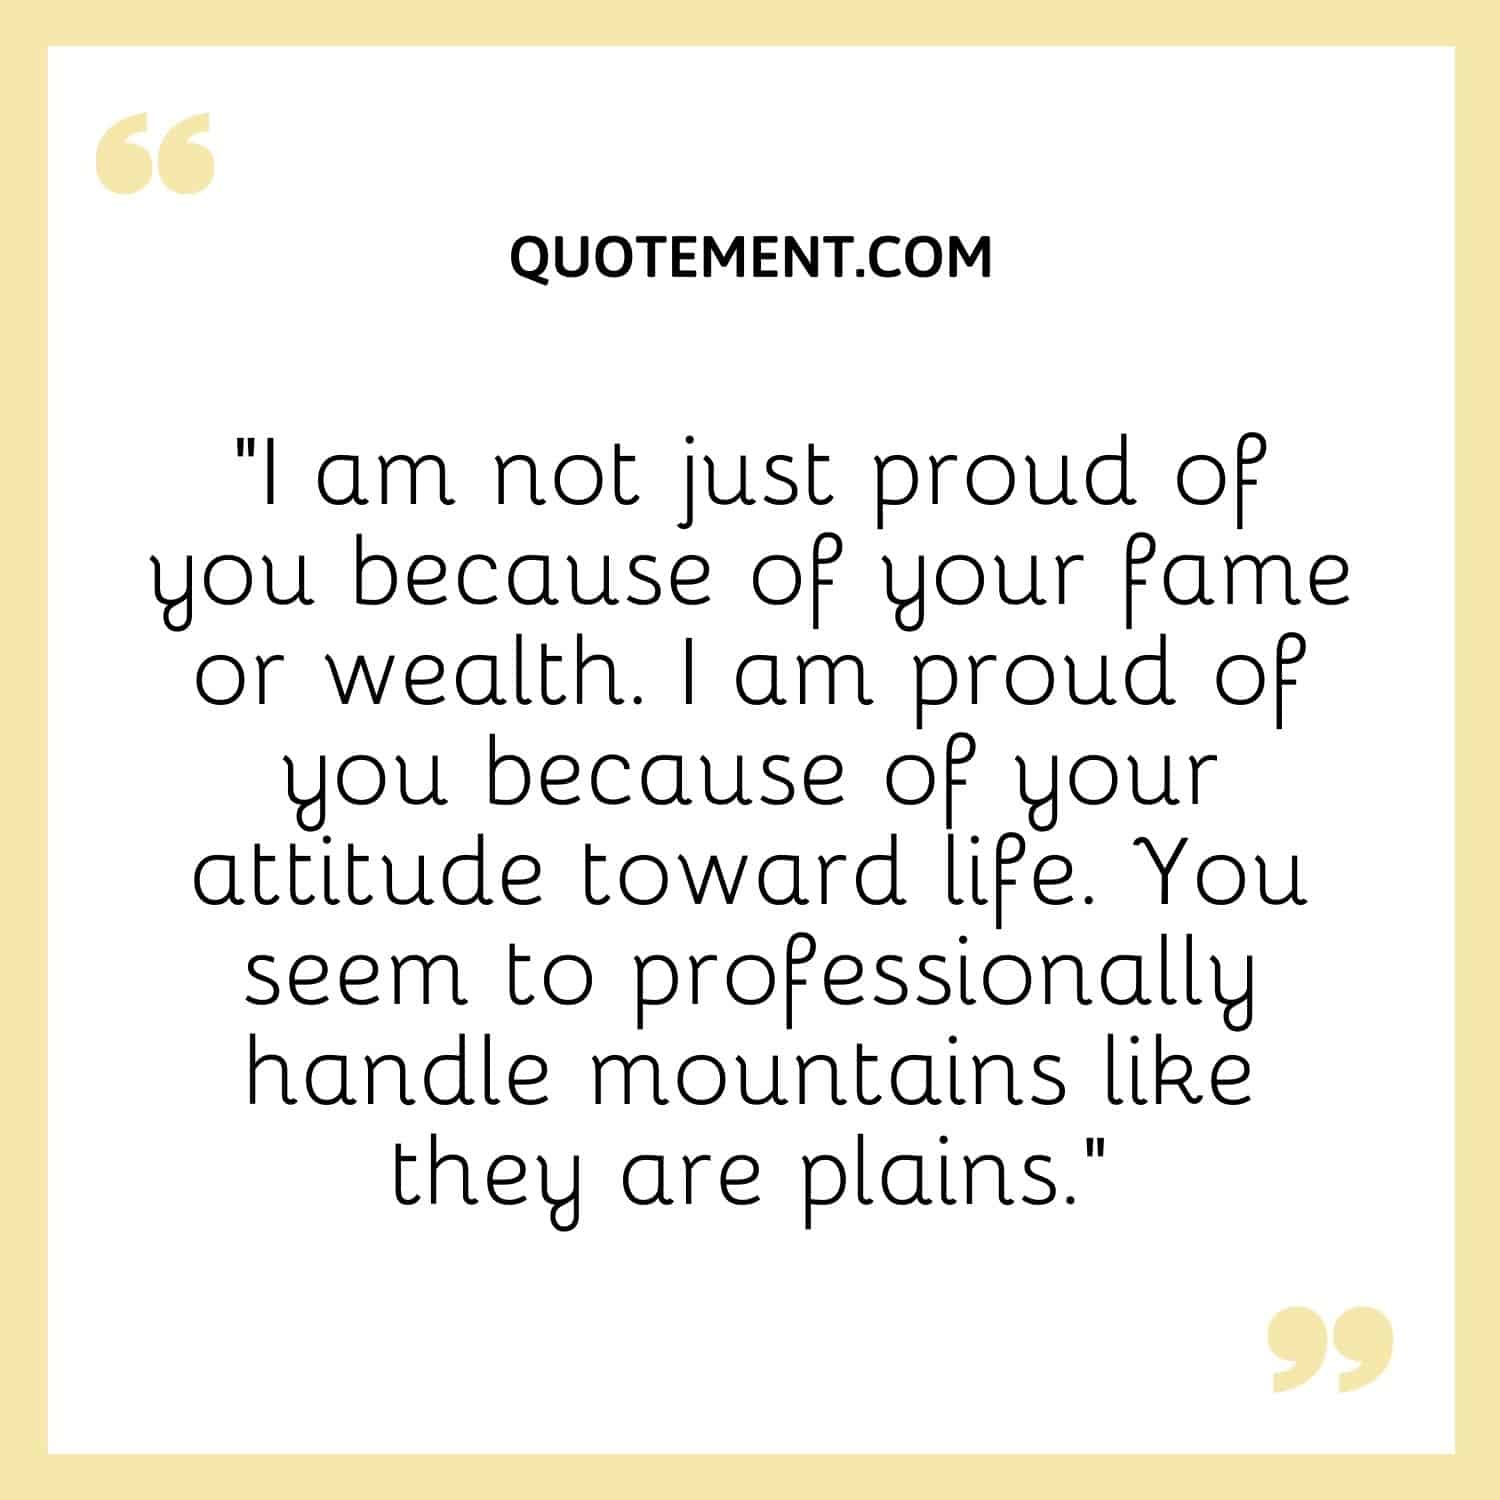 “I am not just proud of you because of your fame or wealth. I am proud of you because of your attitude toward life. You seem to professionally handle mountains like they are plains.”